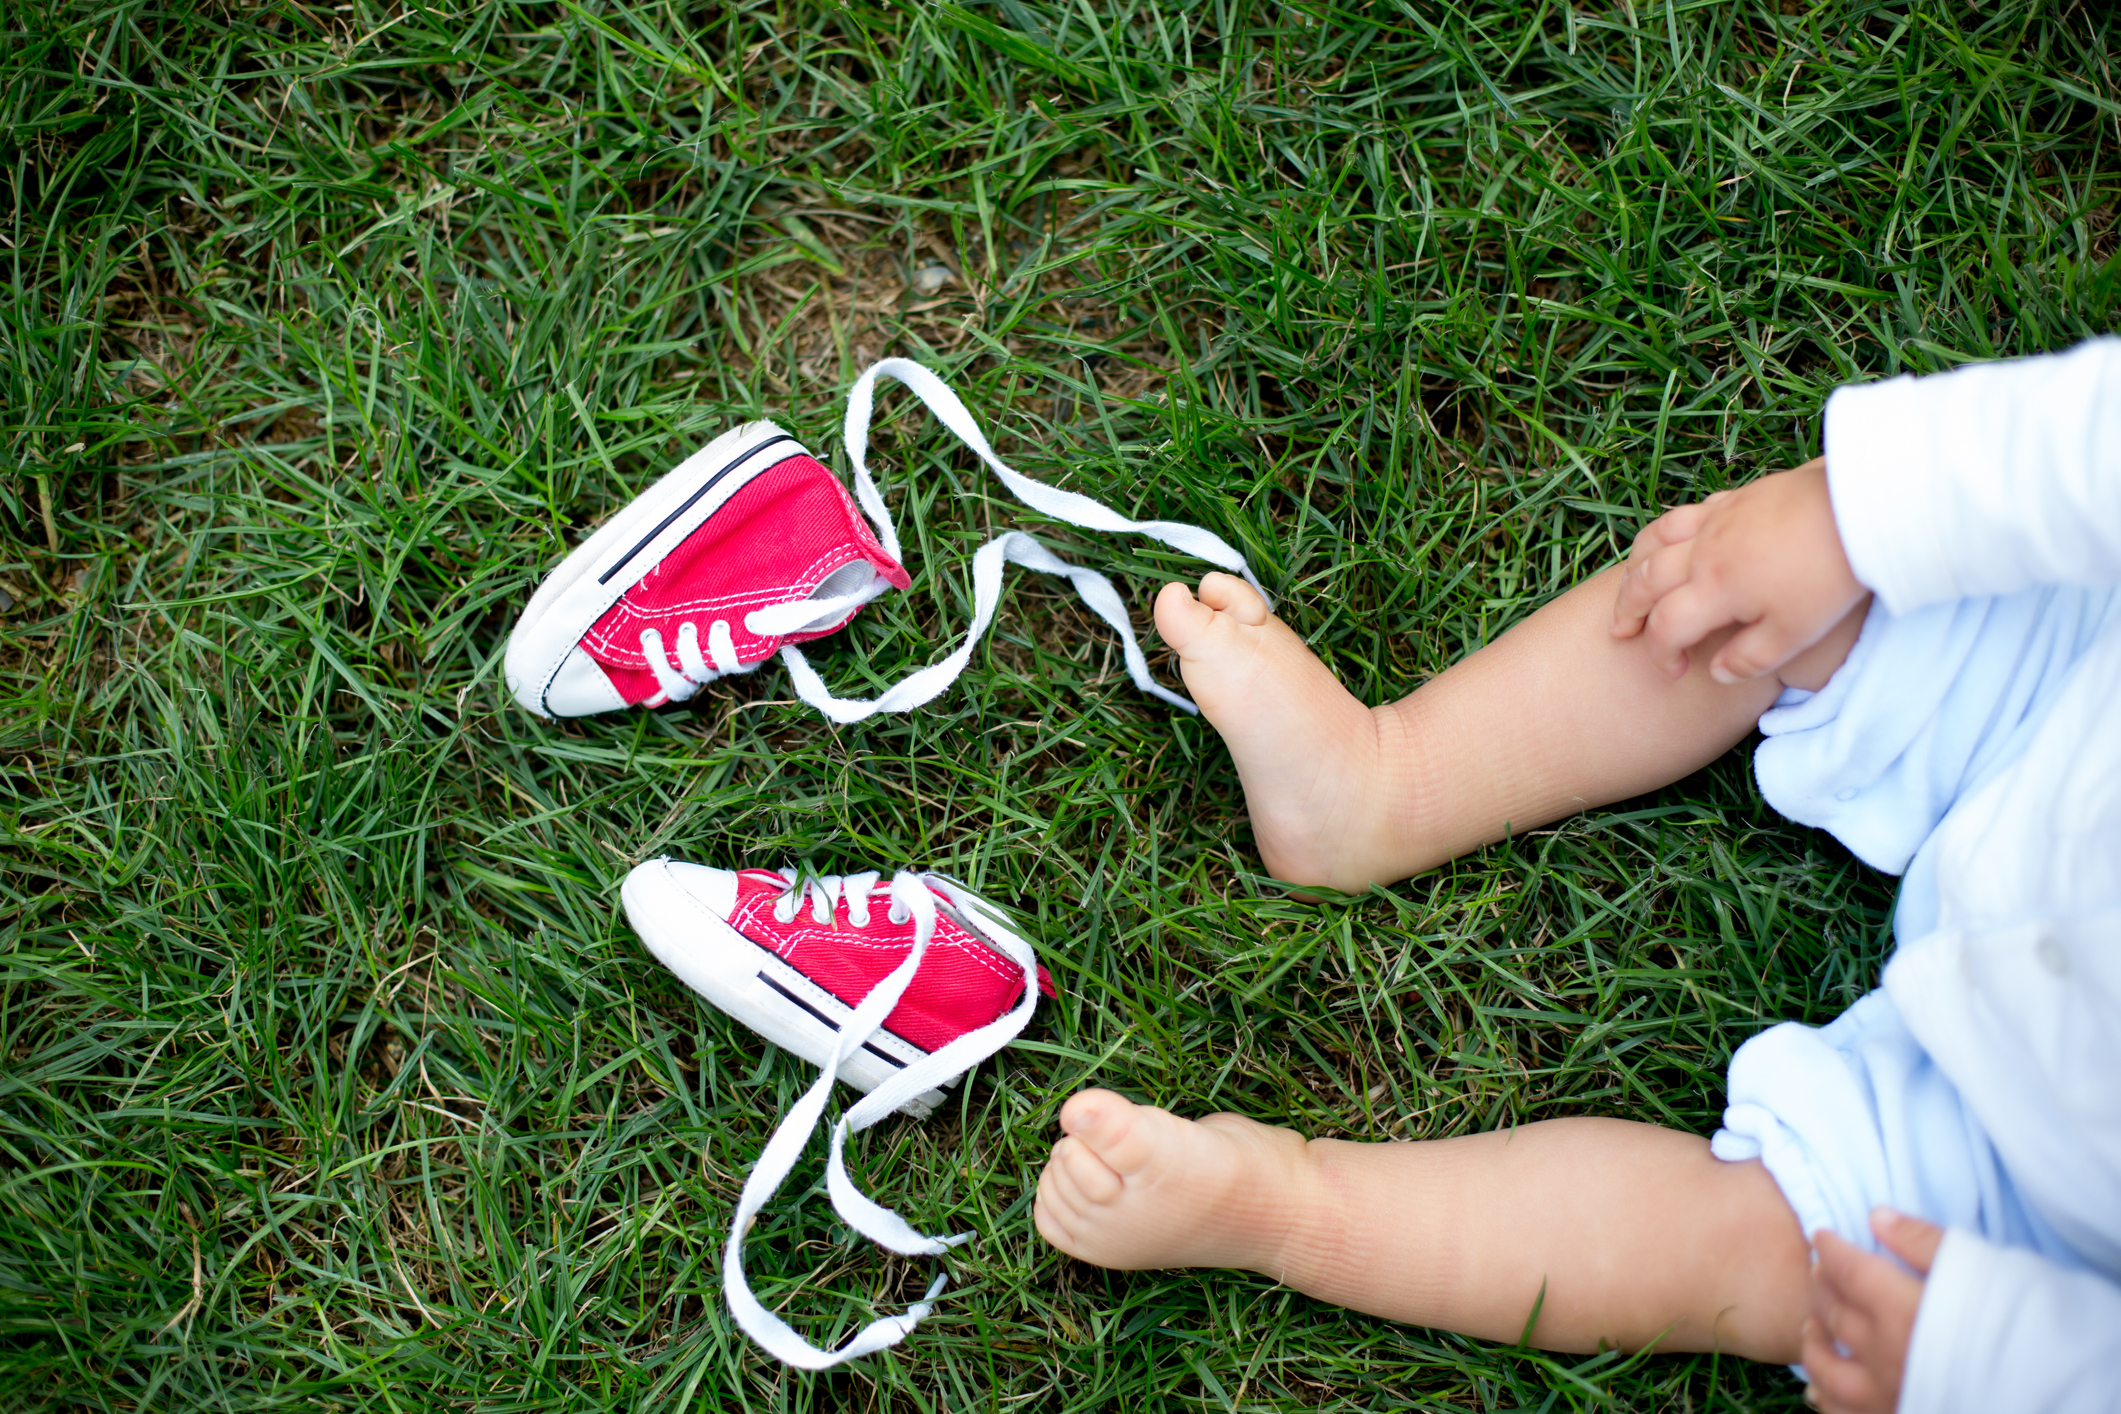 best shoes for chubby baby feet